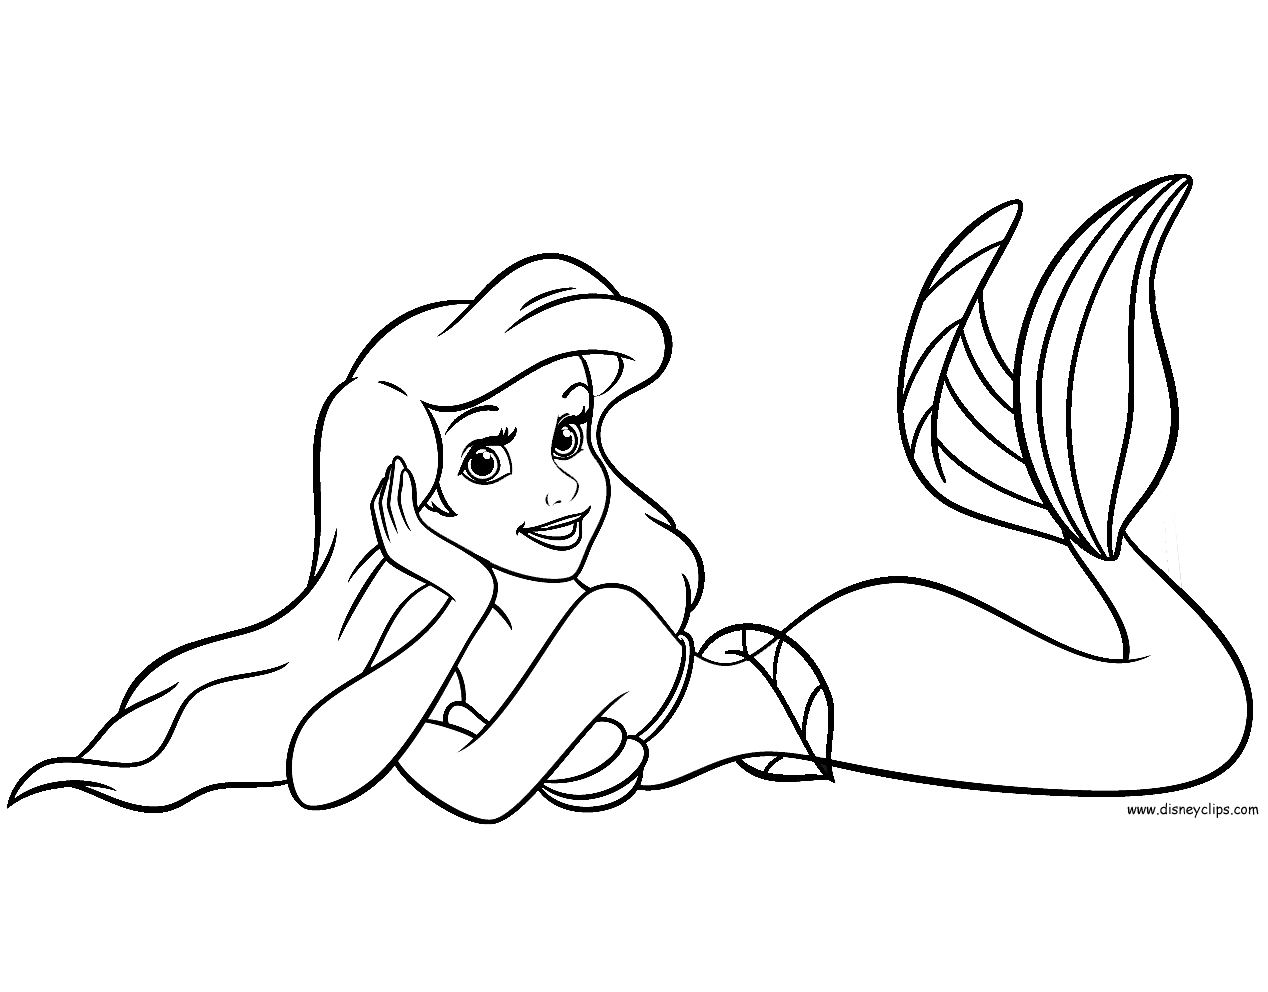 Baby Little Mermaid Coloring Pages / As for the beauty and the beast